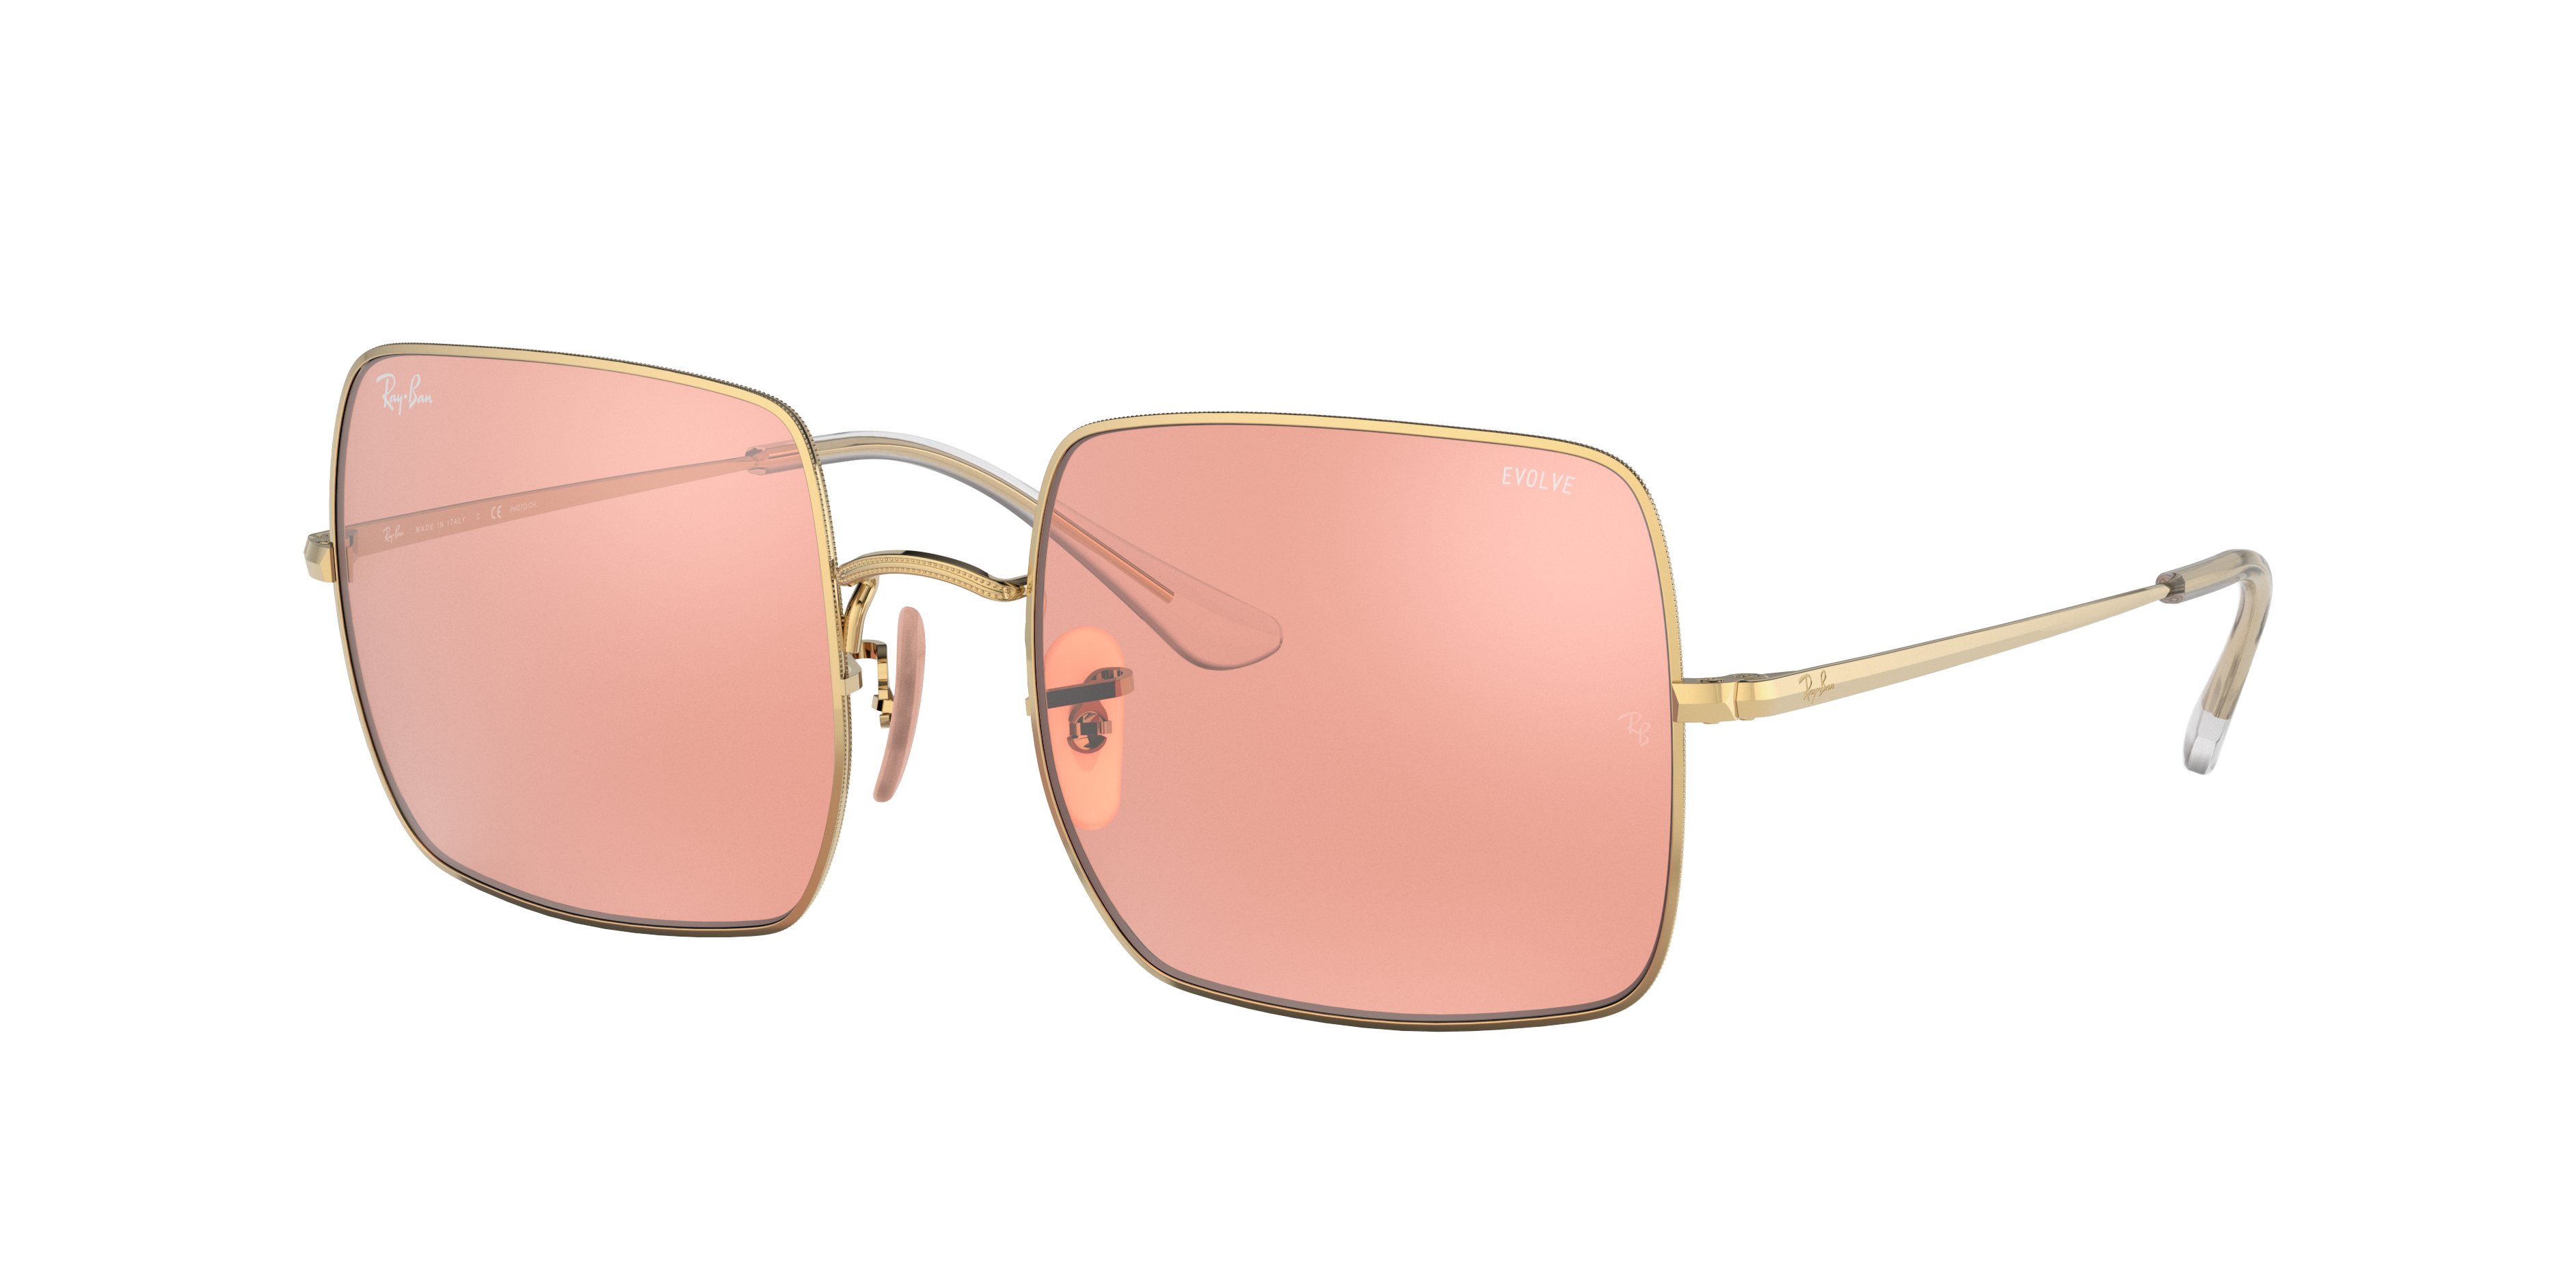 Square 1971 Mirror Sunglasses in Gold and Pink Photochromic | Ray-Ban